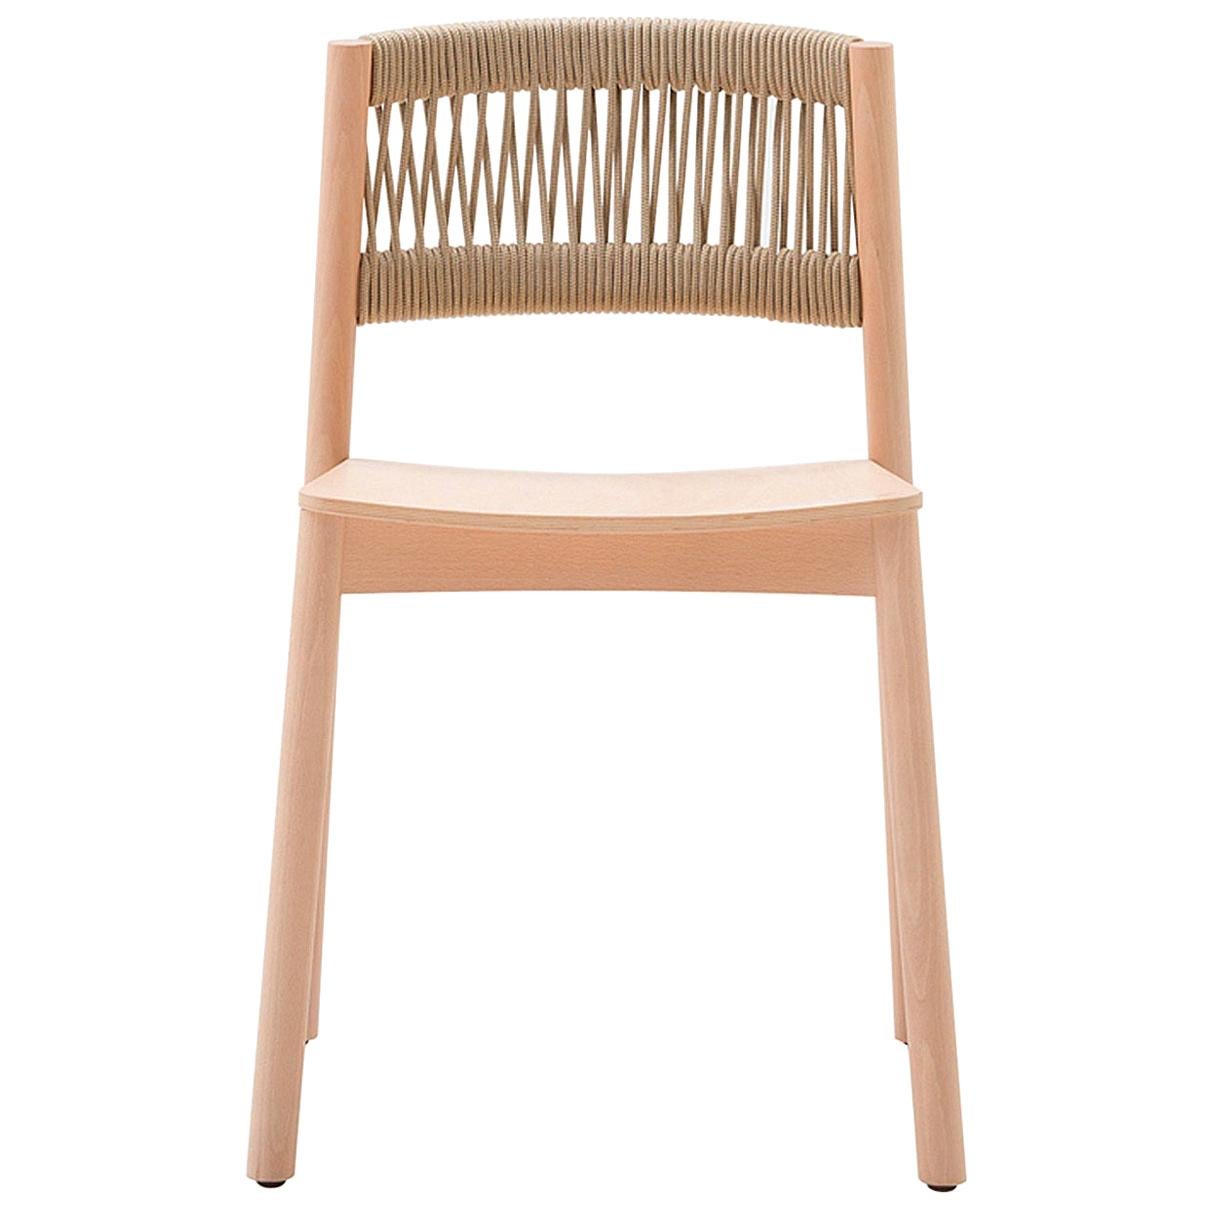 Load Chair by Emilio Nanni For Sale